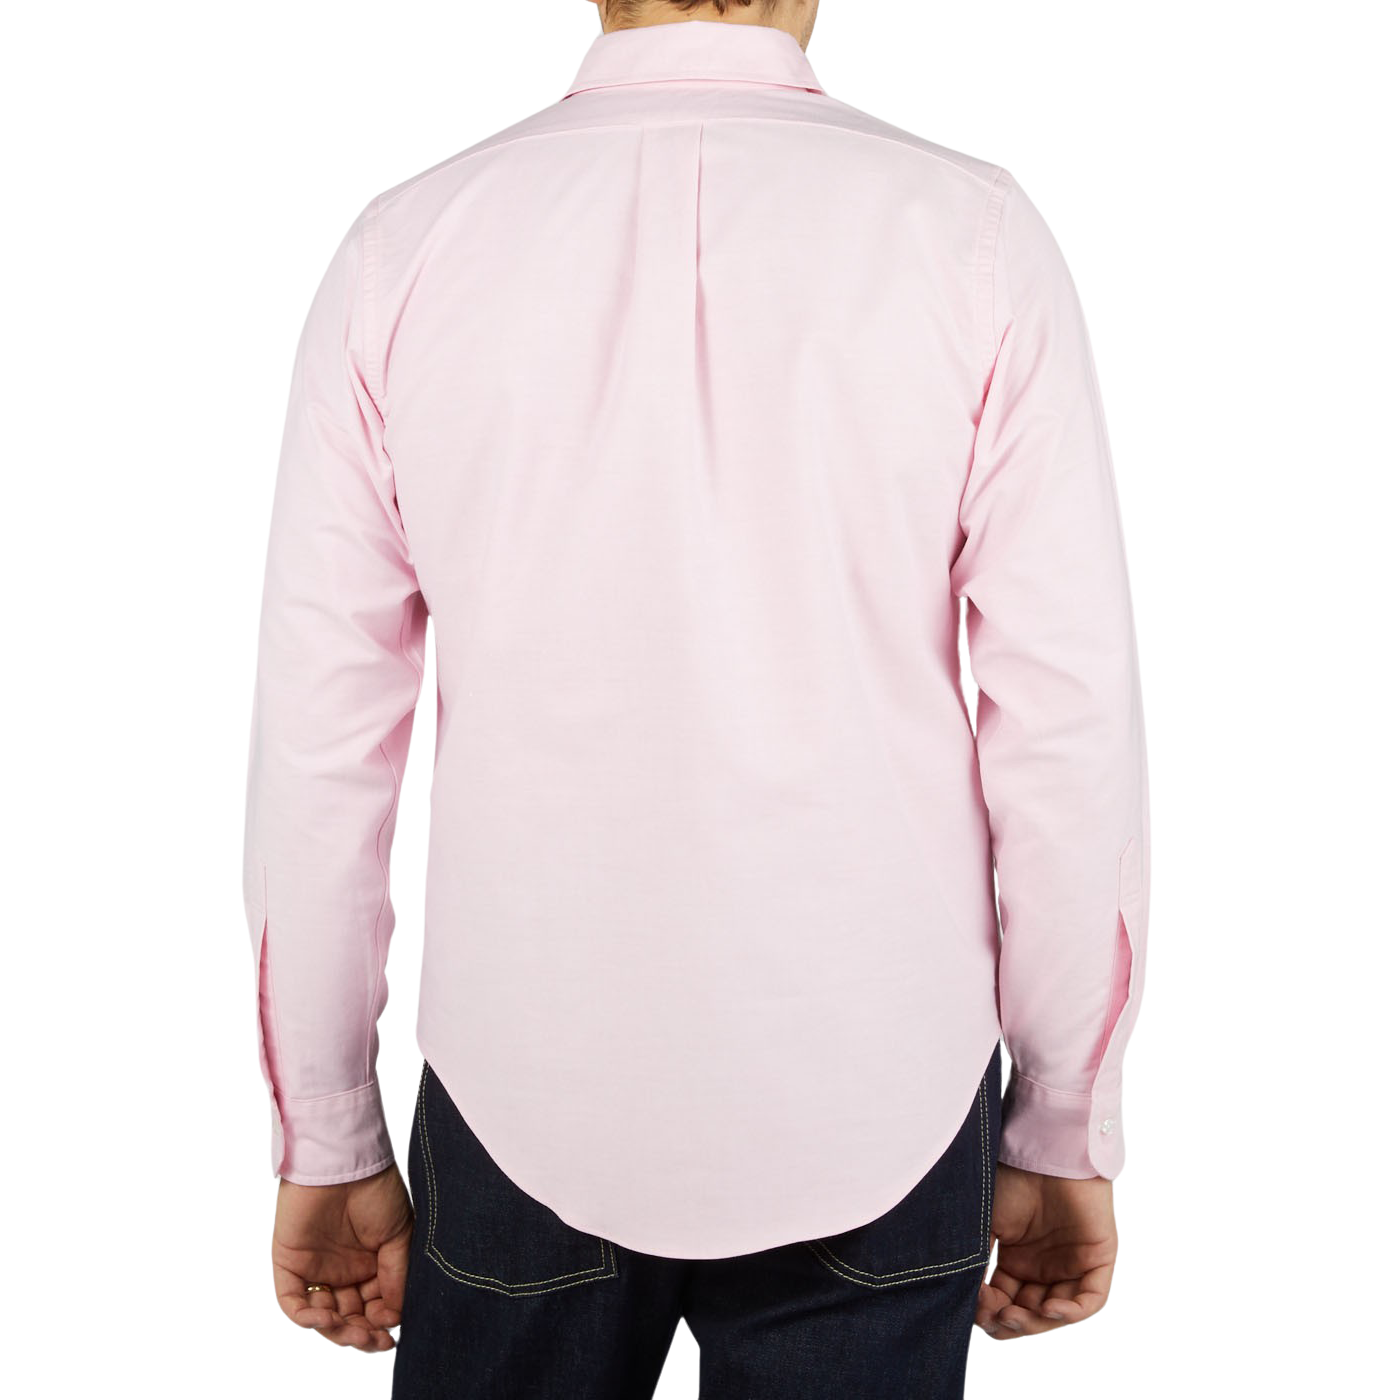 The back view of a man wearing a Pink Cotton Oxford BD Regular Shirt made by Far East Manufacturing.